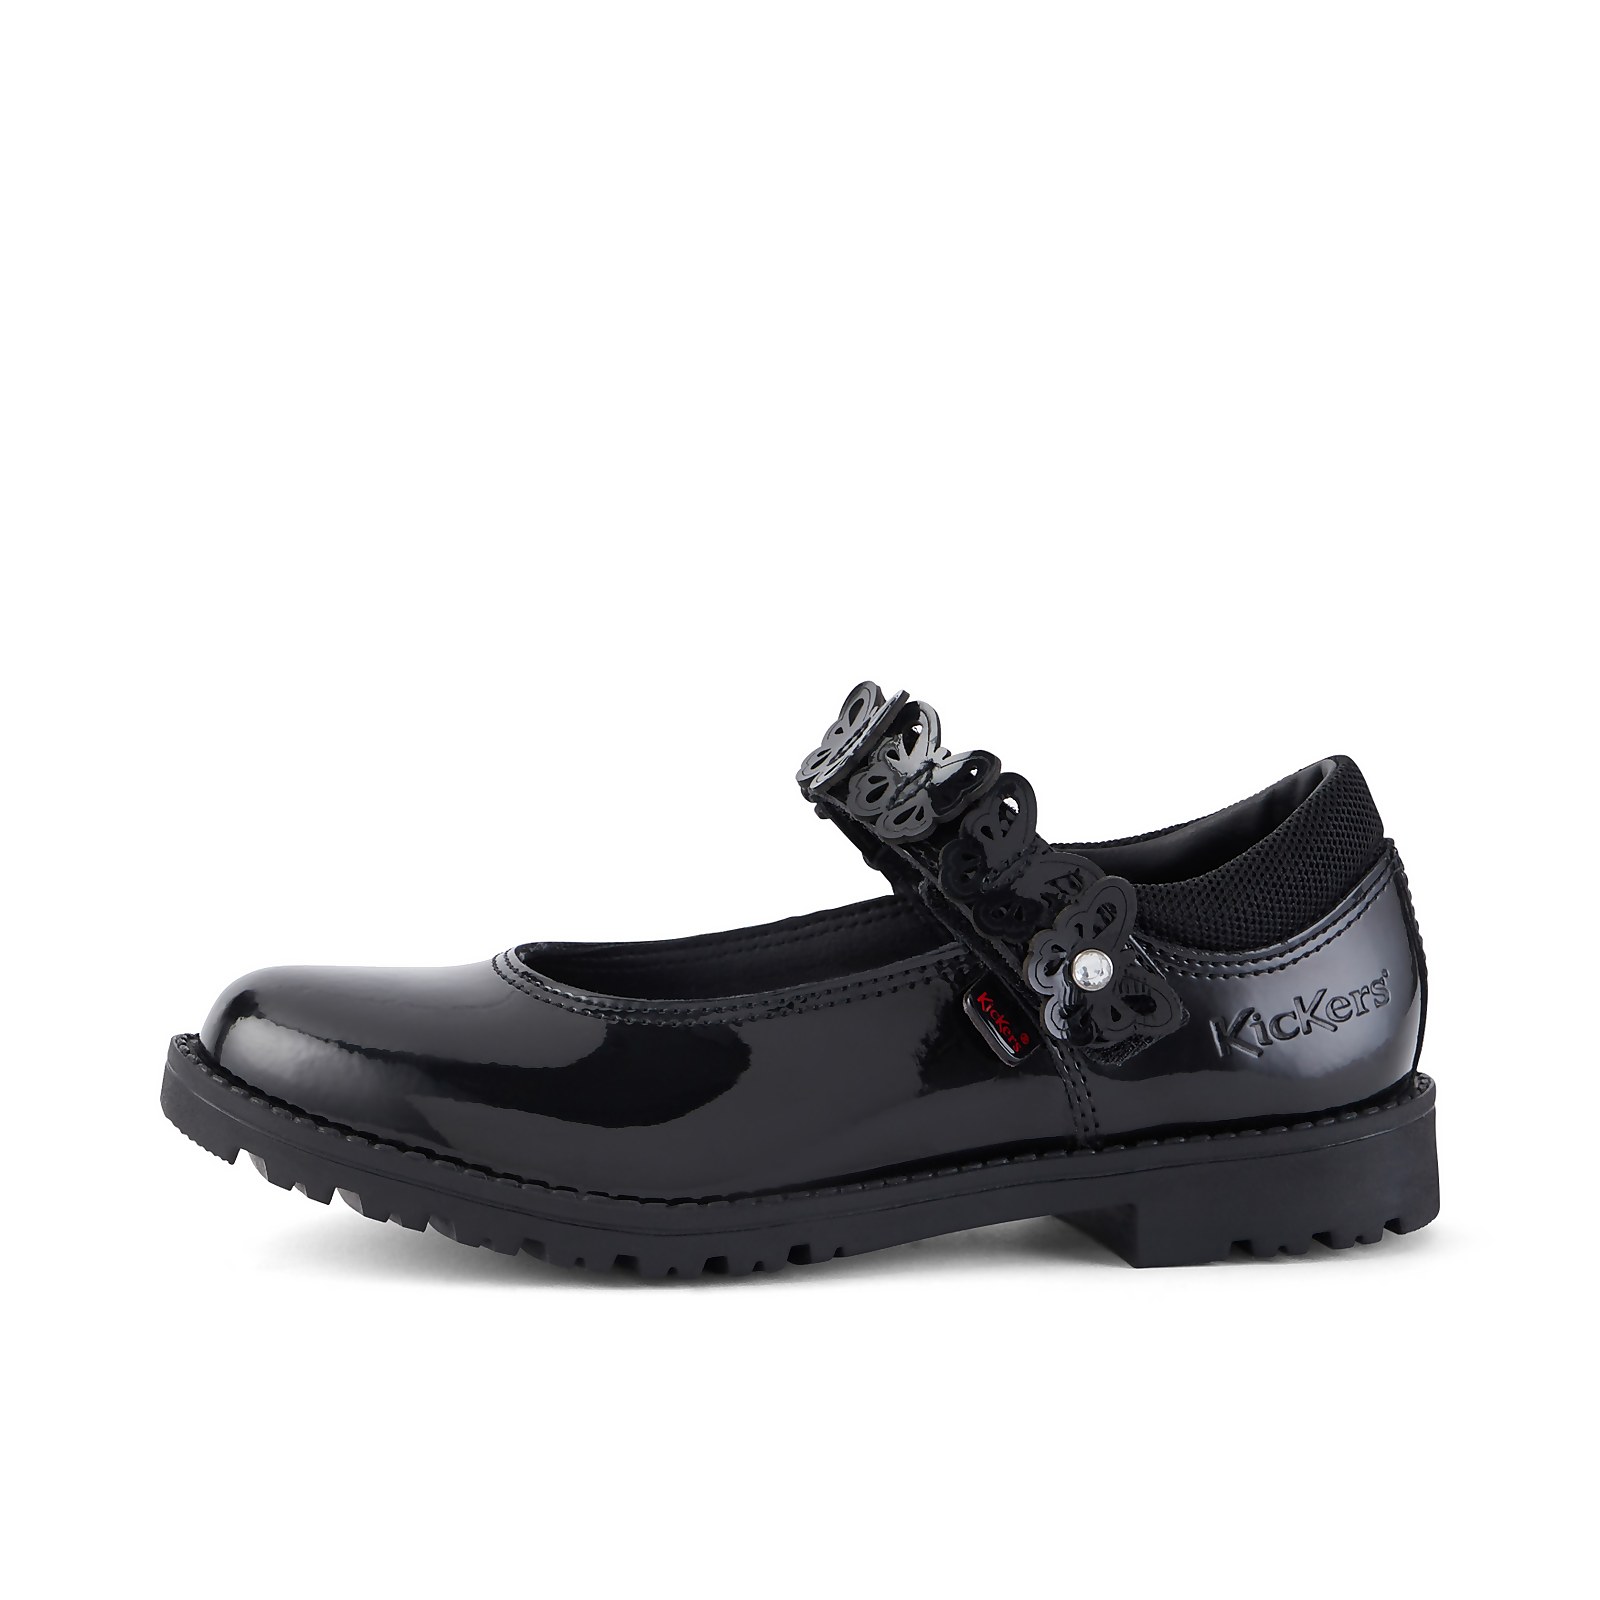 Junior Girls Lachly Butterfly MJ Patent Leather Black